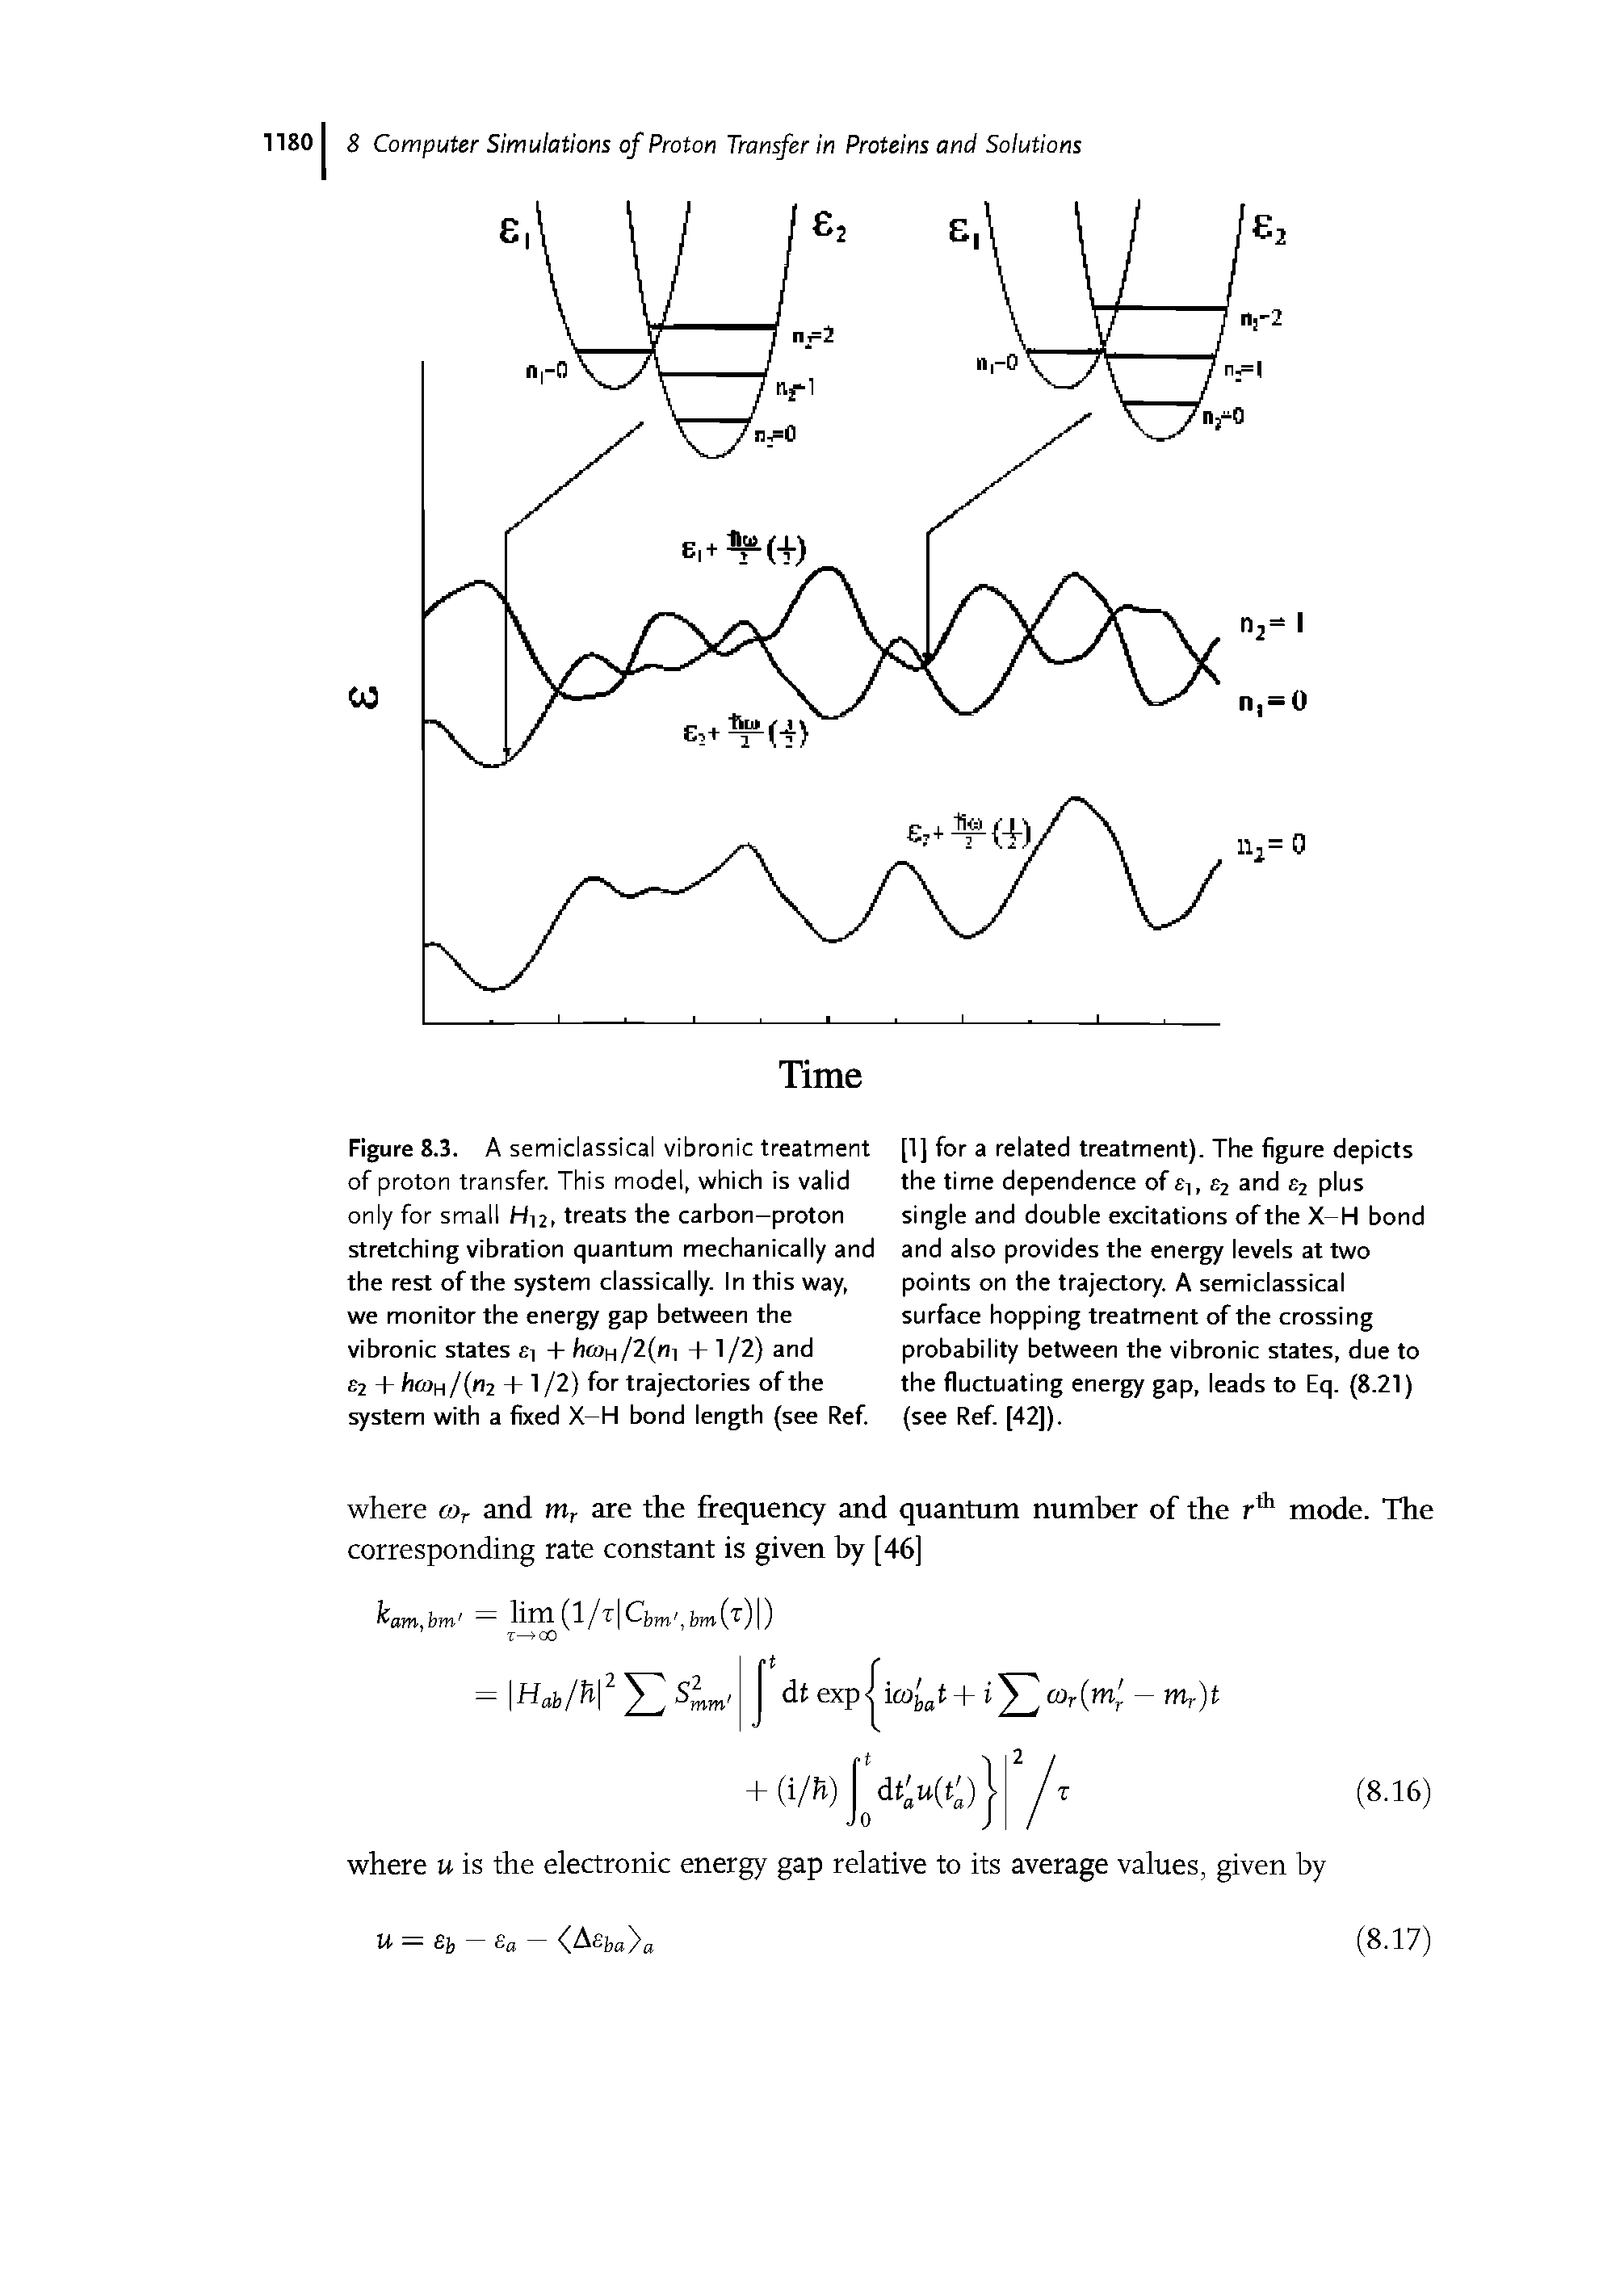 Figure 8.3. A semiclassical vibronic treatment of proton transfer. This model, which is valid only for small Hu, treats the carbon-proton stretching vibration quantum mechanically and the rest of the system classically. In this way, we monitor the energy gap between the vibronic states Ej + hoH/2(n] + 1 /2) and 2 + hcoH/(n2 + 1 /2) for trajectories of the system with a fixed X-H bond length (see Ref...